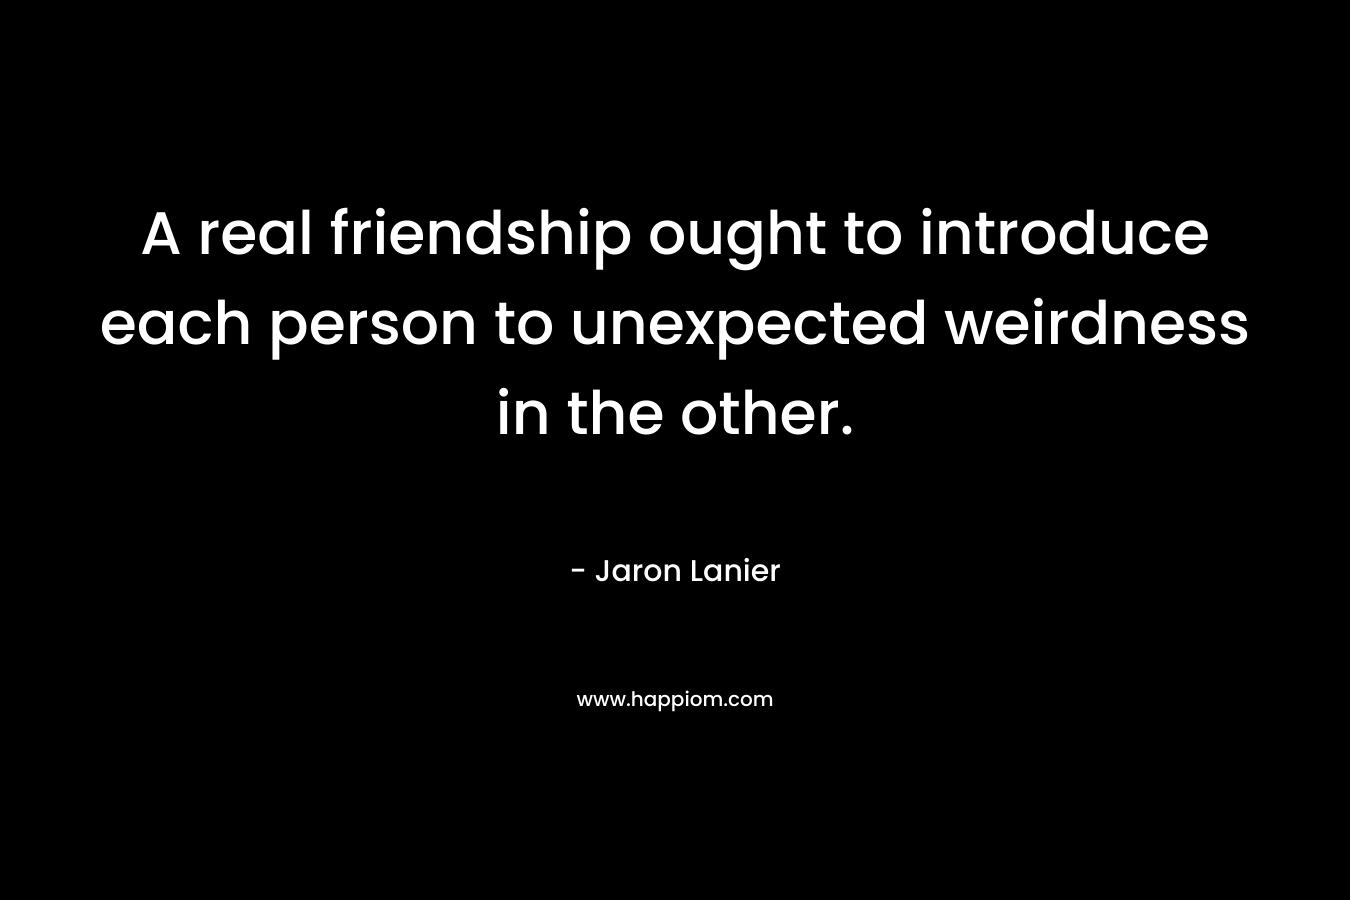 A real friendship ought to introduce each person to unexpected weirdness in the other.